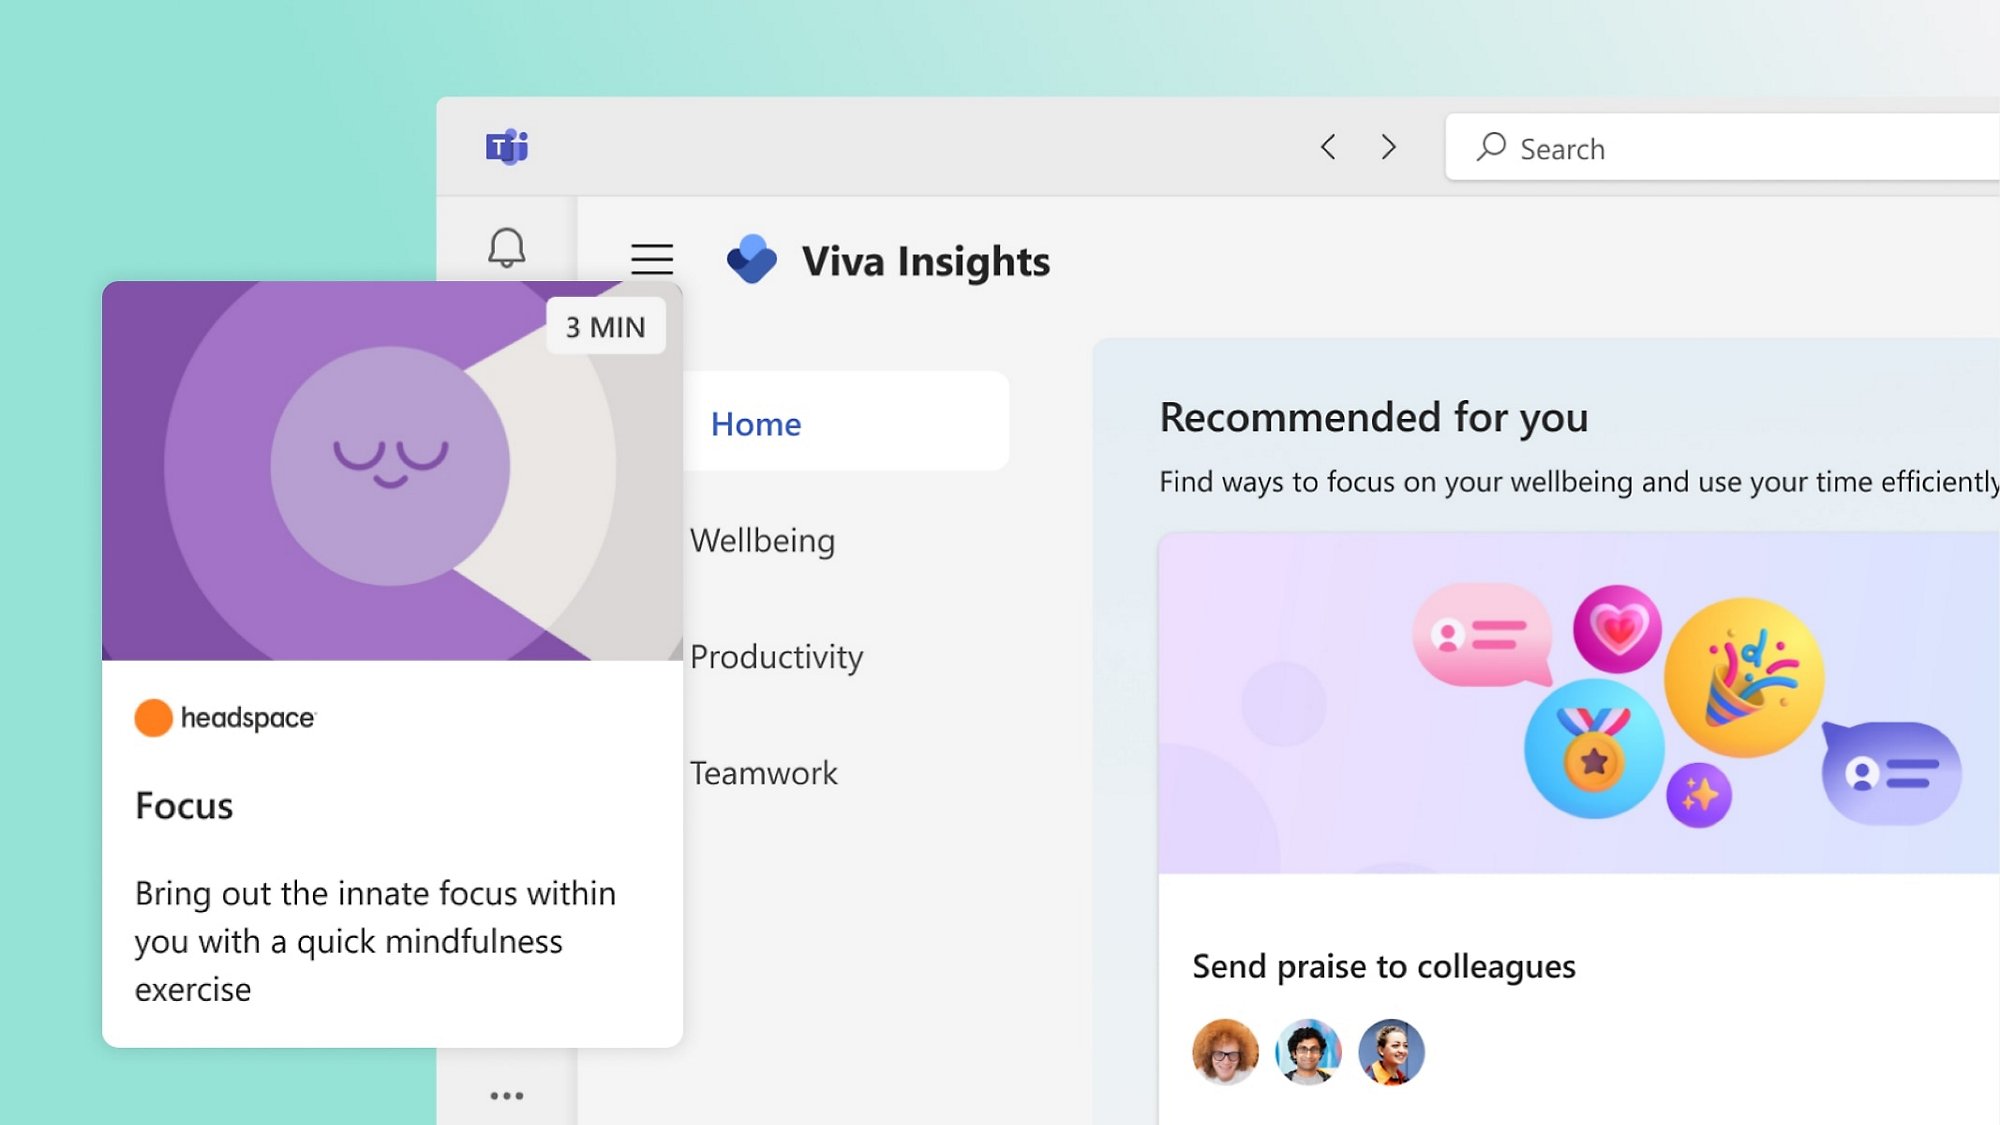 A headspace focus reminder in Viva Insights